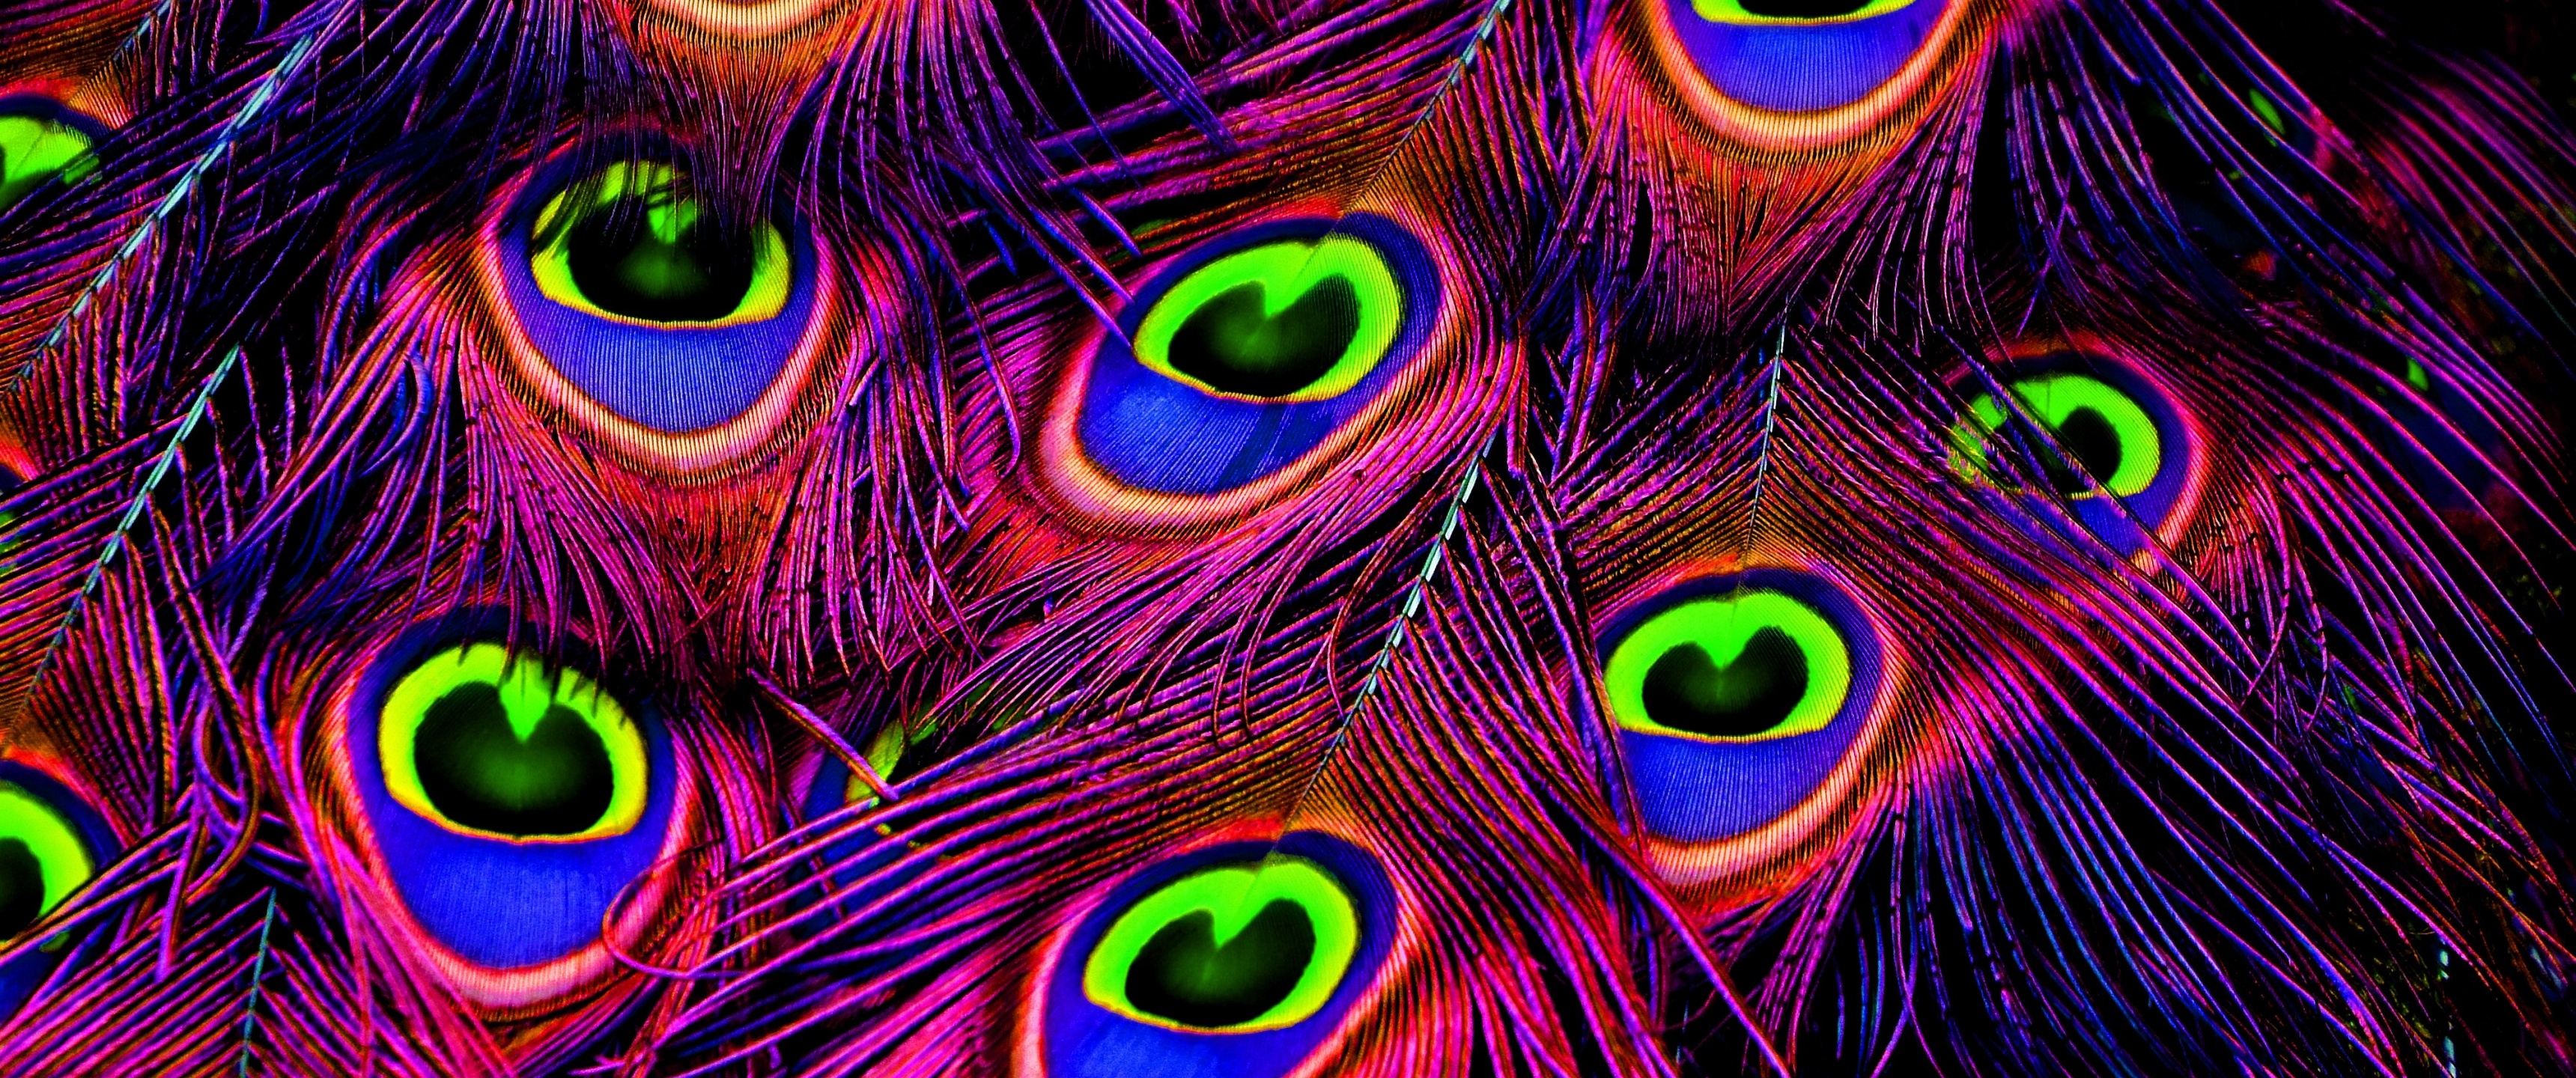 Download Peacock, Feathers, Colorful, Plumage, Wallpaper - Peacock Feather  Wallpaper Hd For Mobile for des… | Feather wallpaper, Peacock wallpaper,  Peacock pictures